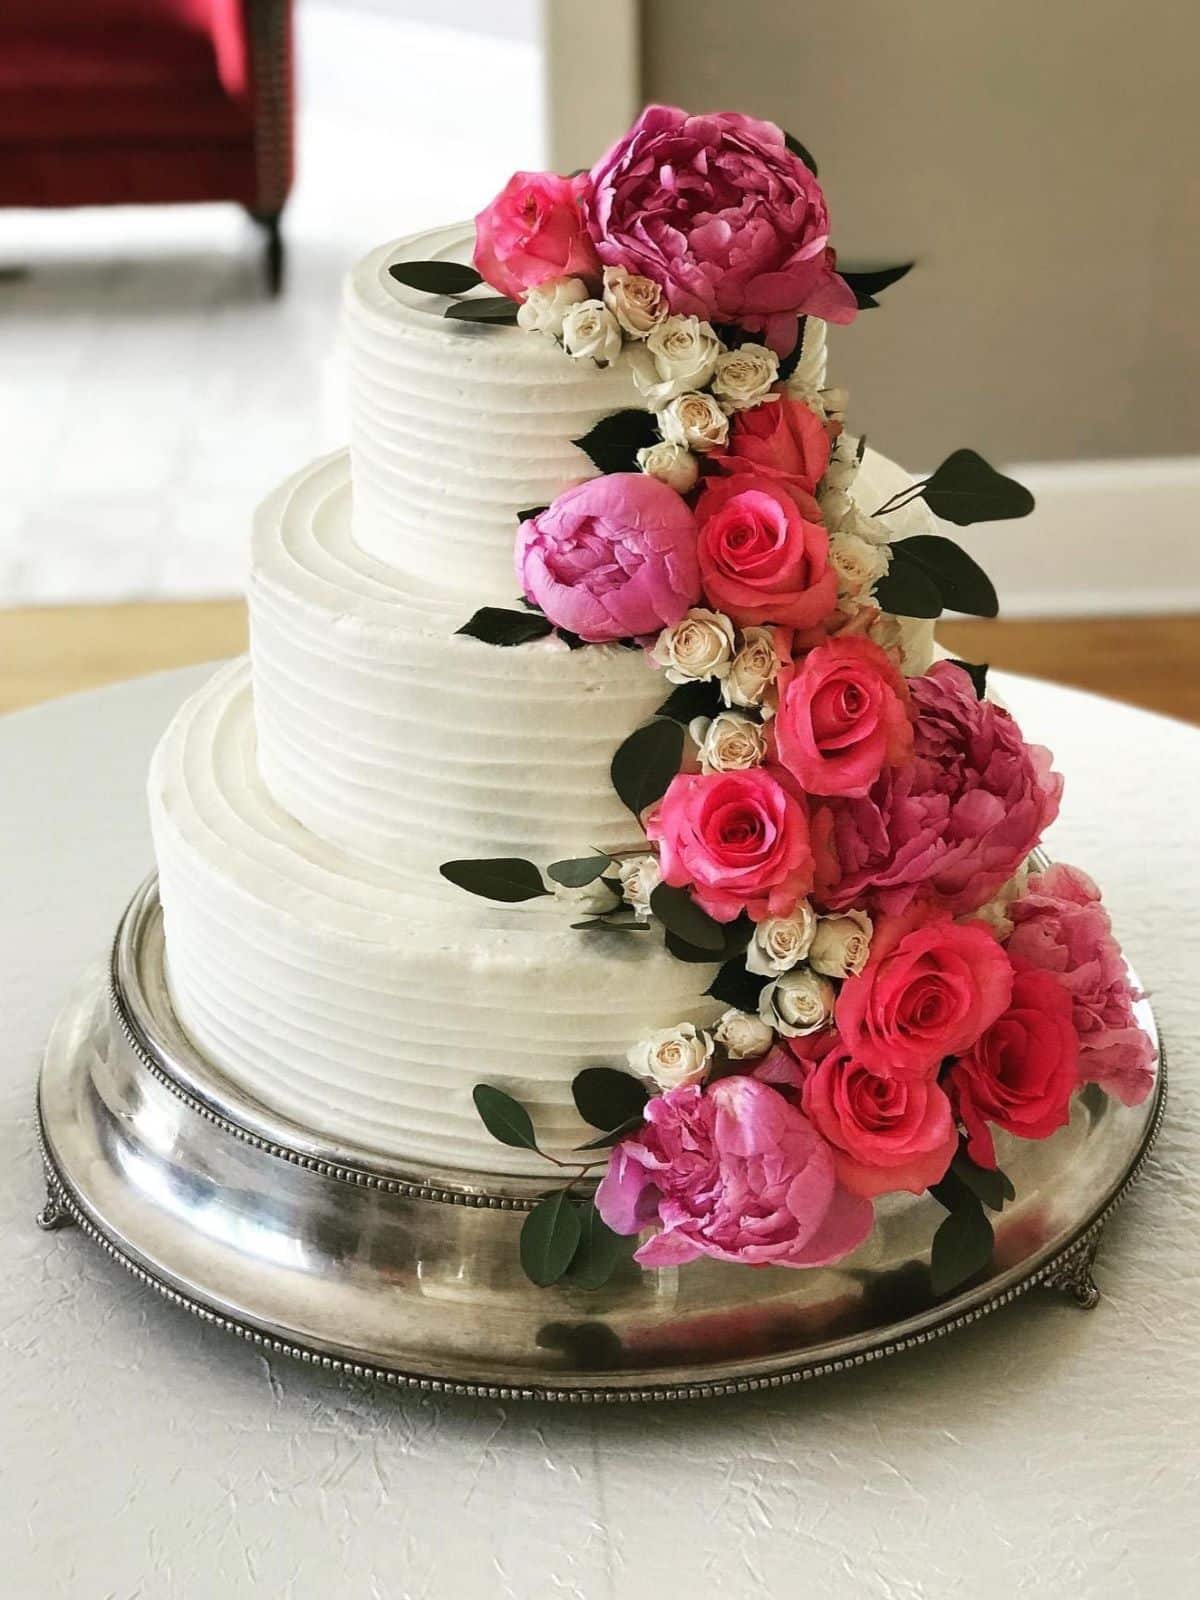 A tiered wedding cake on a cake stand at a wedding venue.